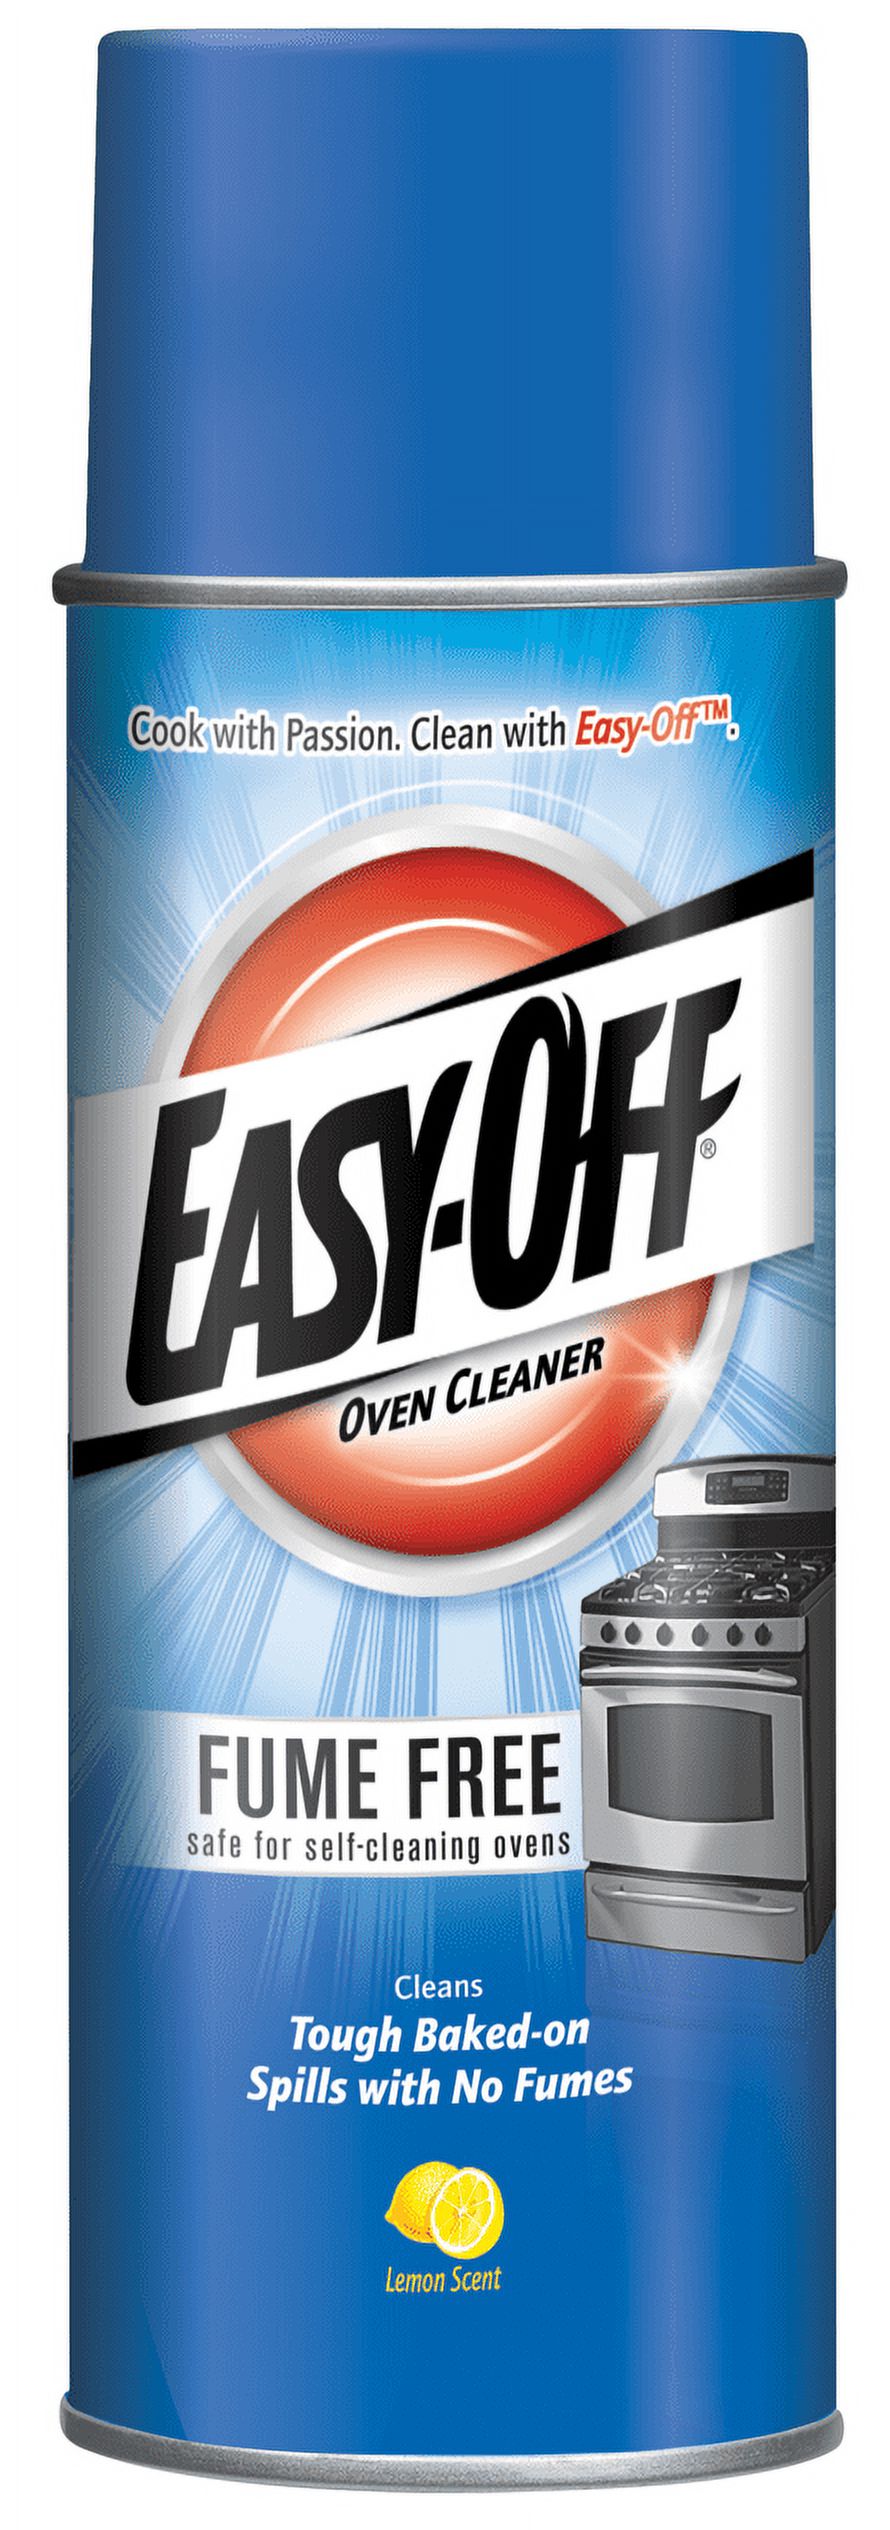 EASY-OFF Fume Free Oven Cleaner Spray, Lemon 14.5 oz, Removes Grease - image 1 of 6